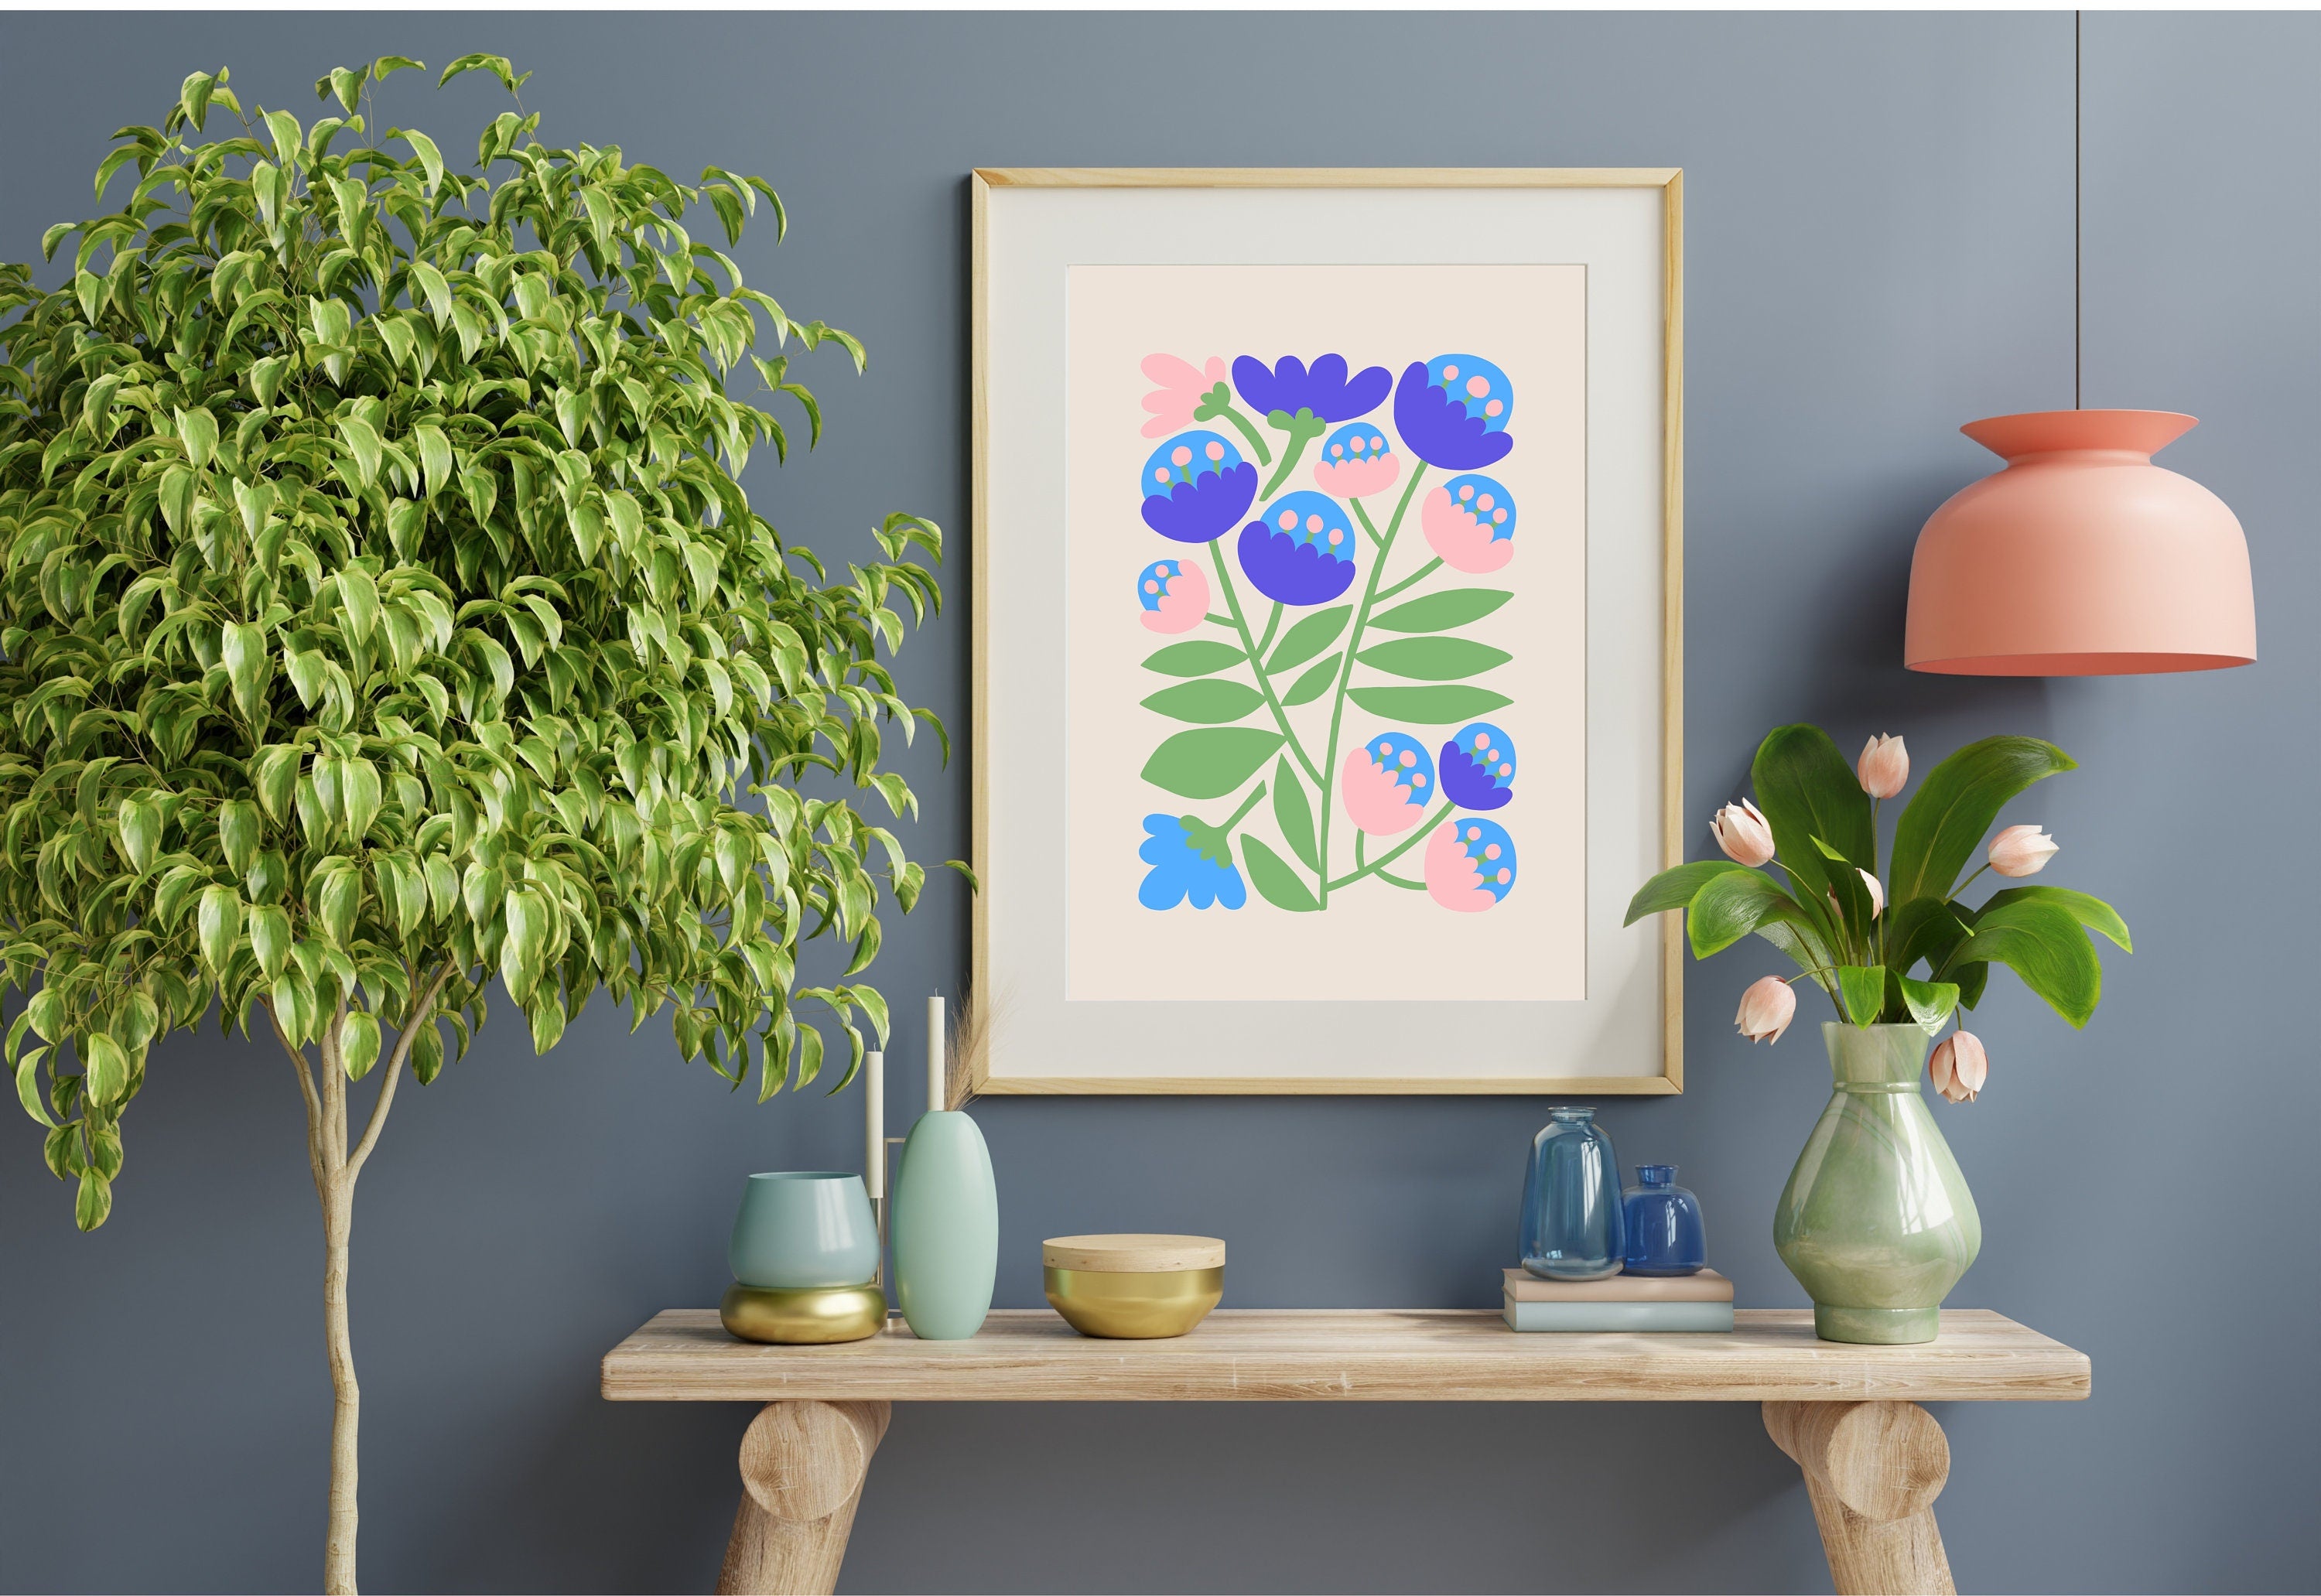 Add a touch of elegance and vibrancy to your space with this delightful Bouquet of Flowers Digital Art Print from GS Print Shoppe.